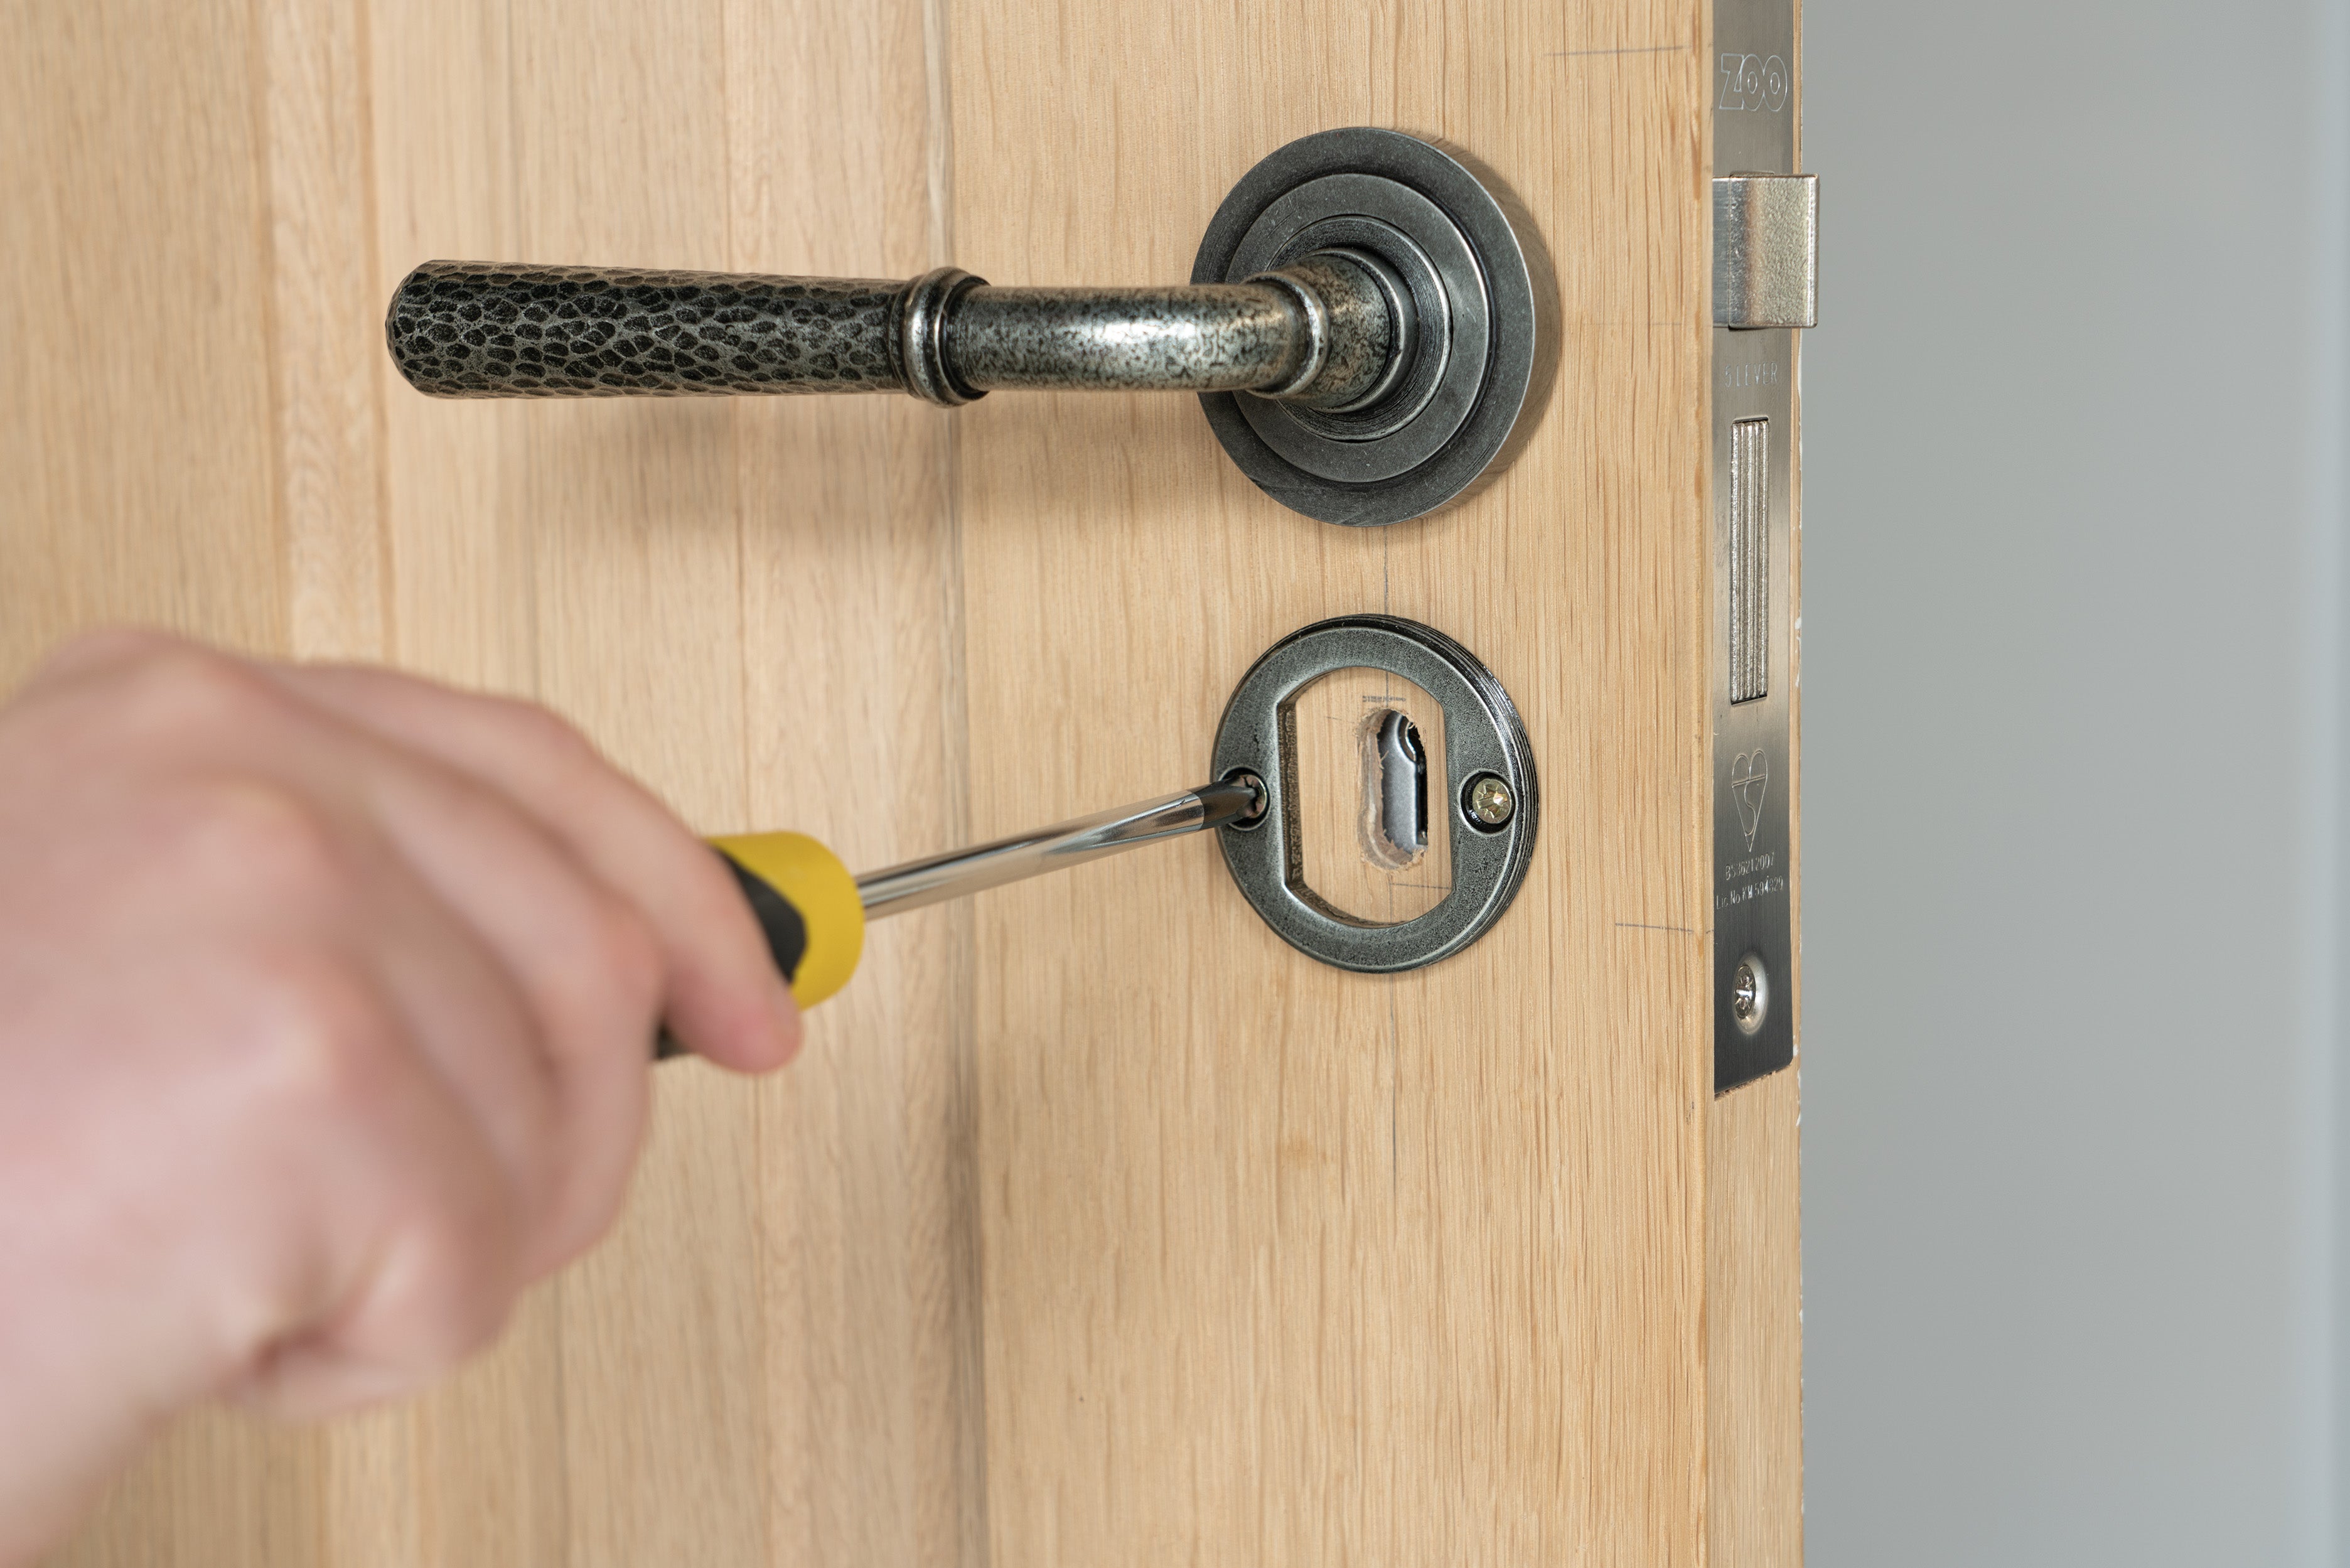 Person using a screwdriver to tighten the screws in a concealed Pewter escutcheon on a wooden door.